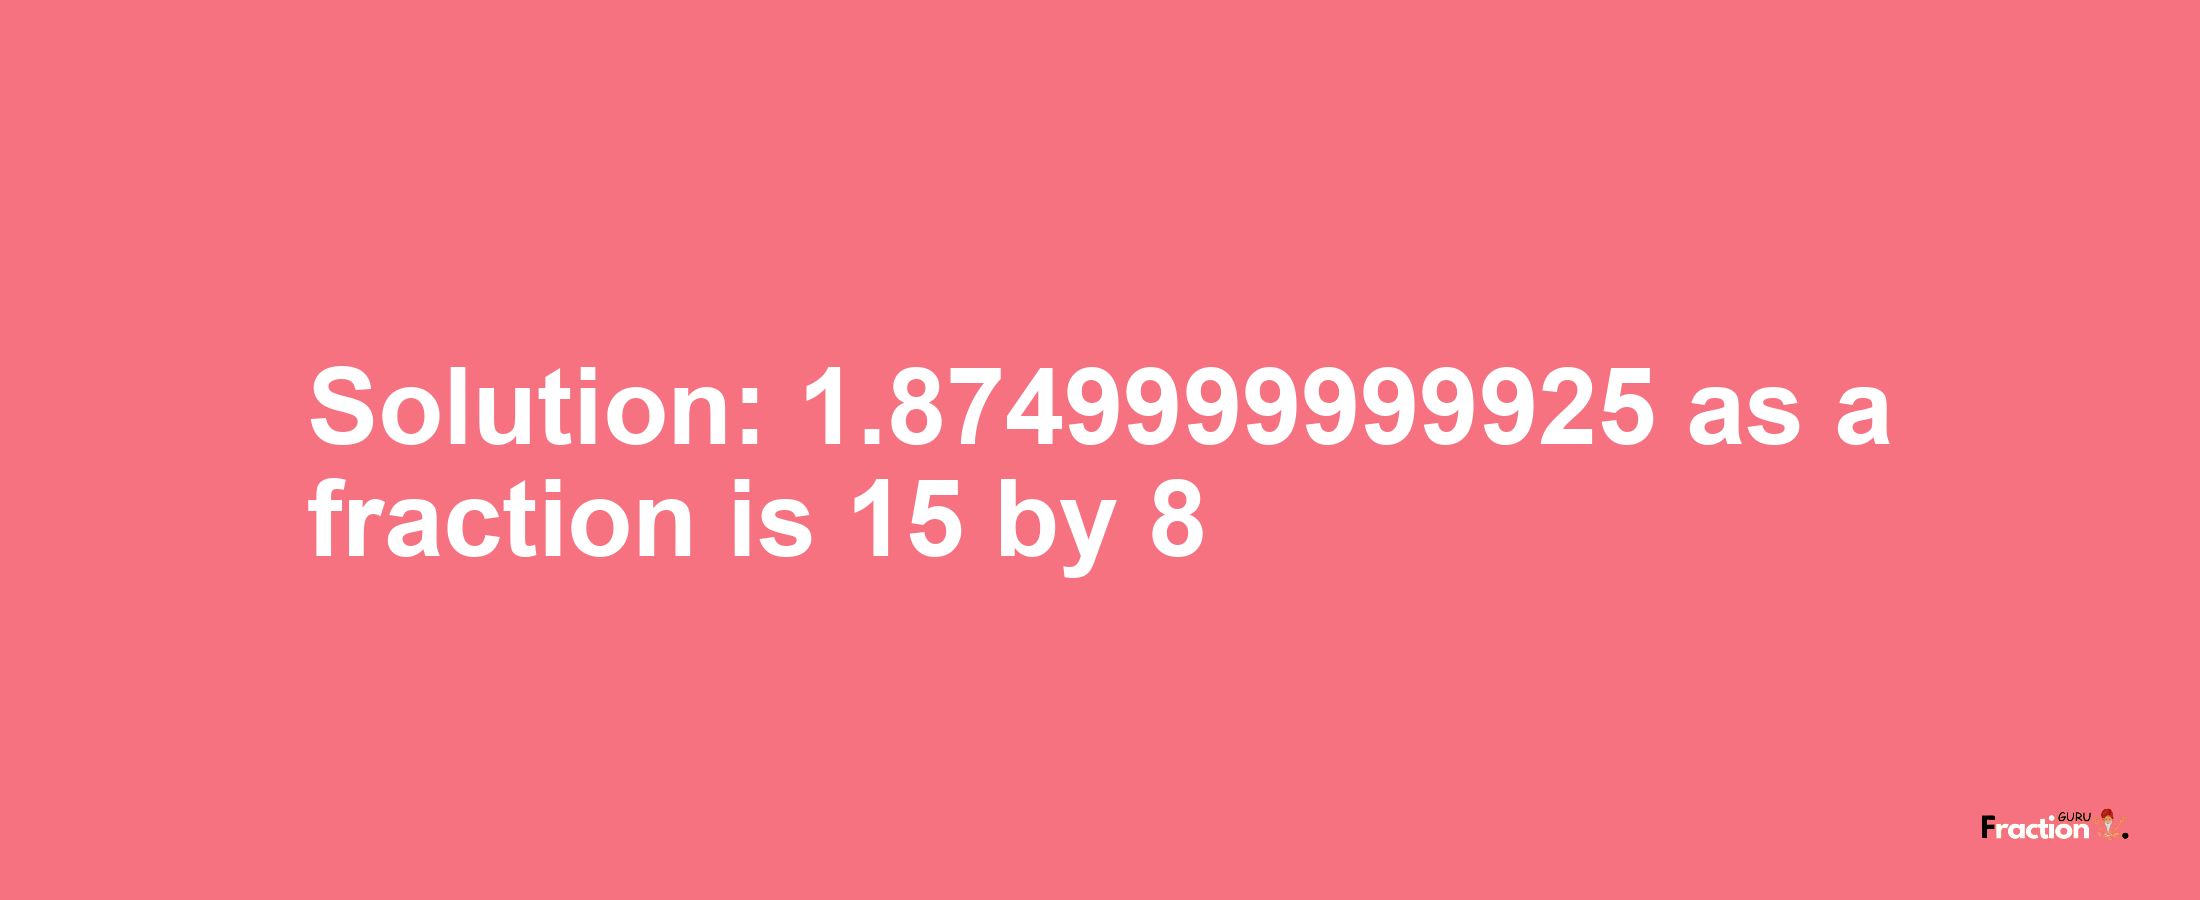 Solution:1.8749999999925 as a fraction is 15/8